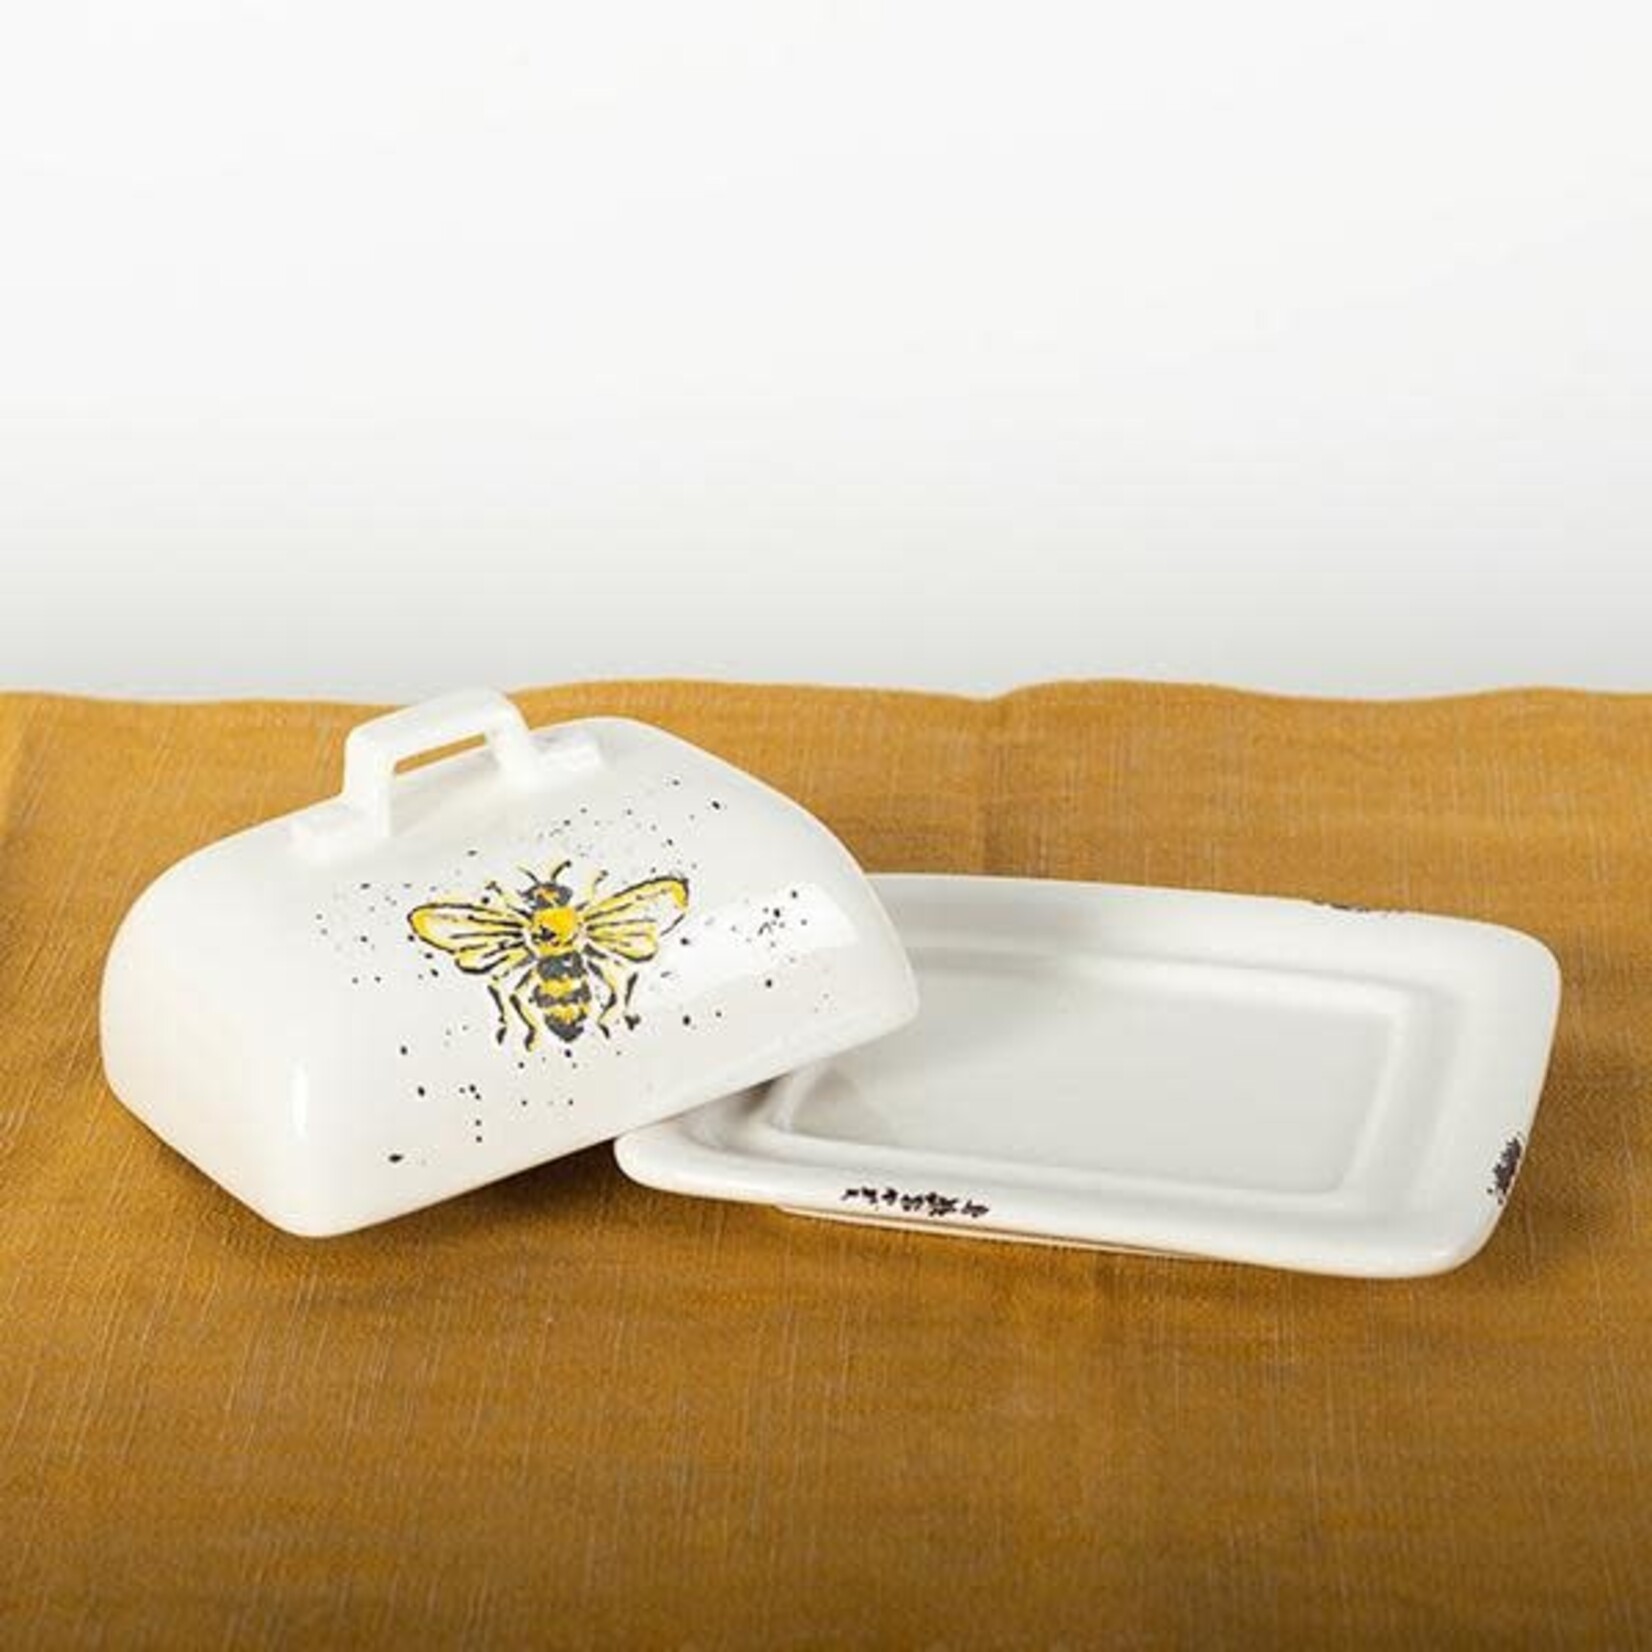 Forpost Trade Bee Butter Dish